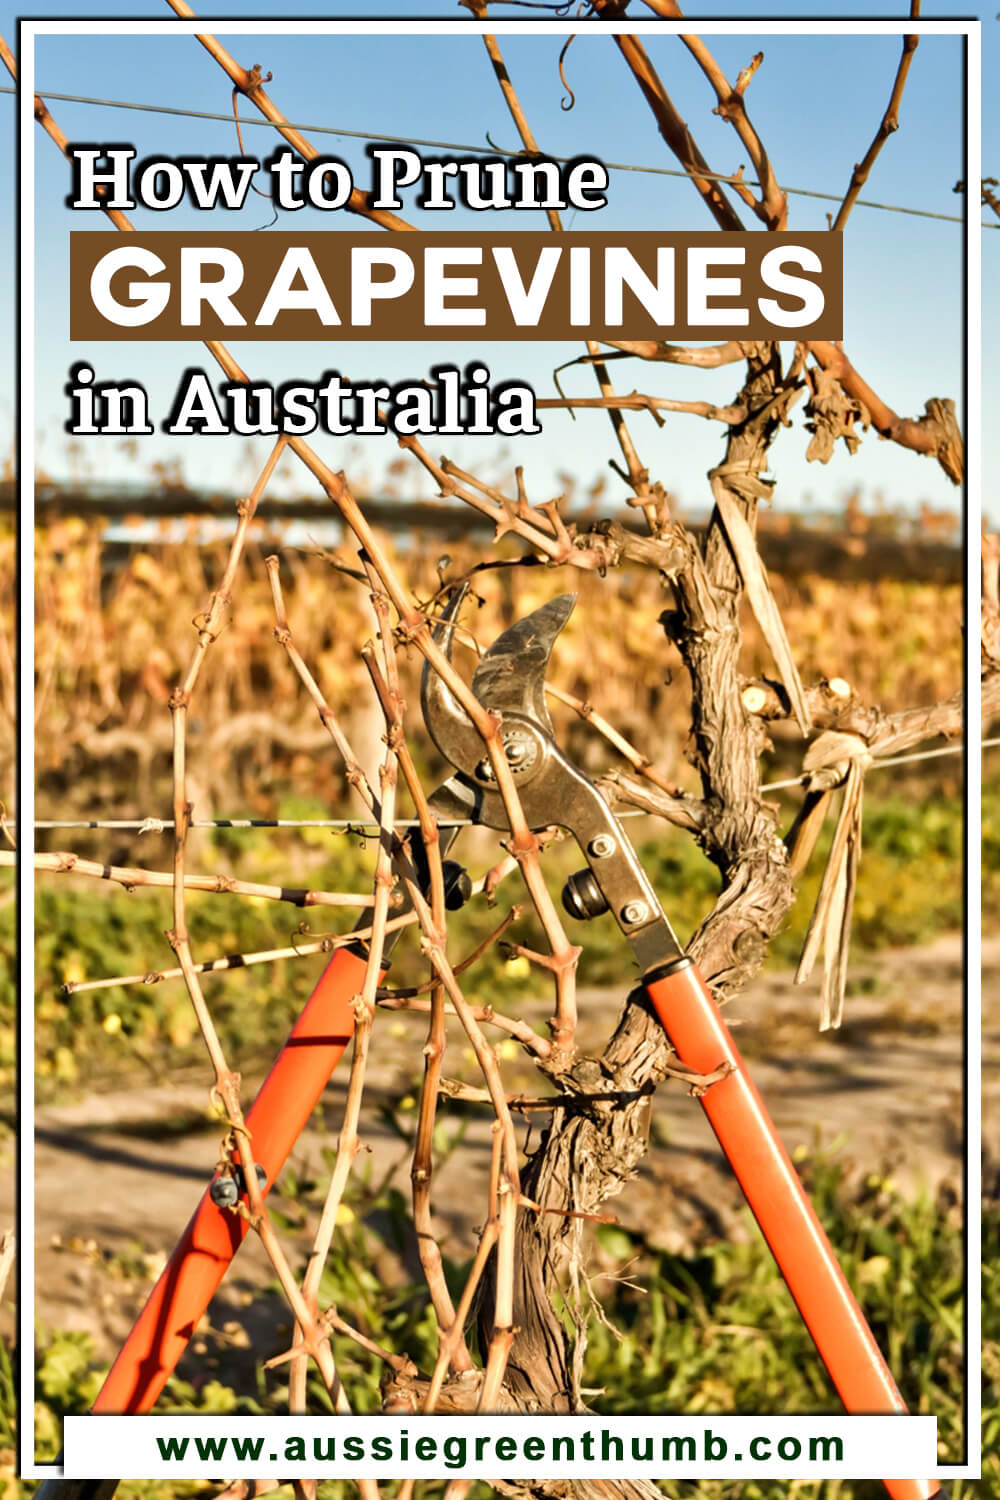 How to Prune Grapevines in Australia